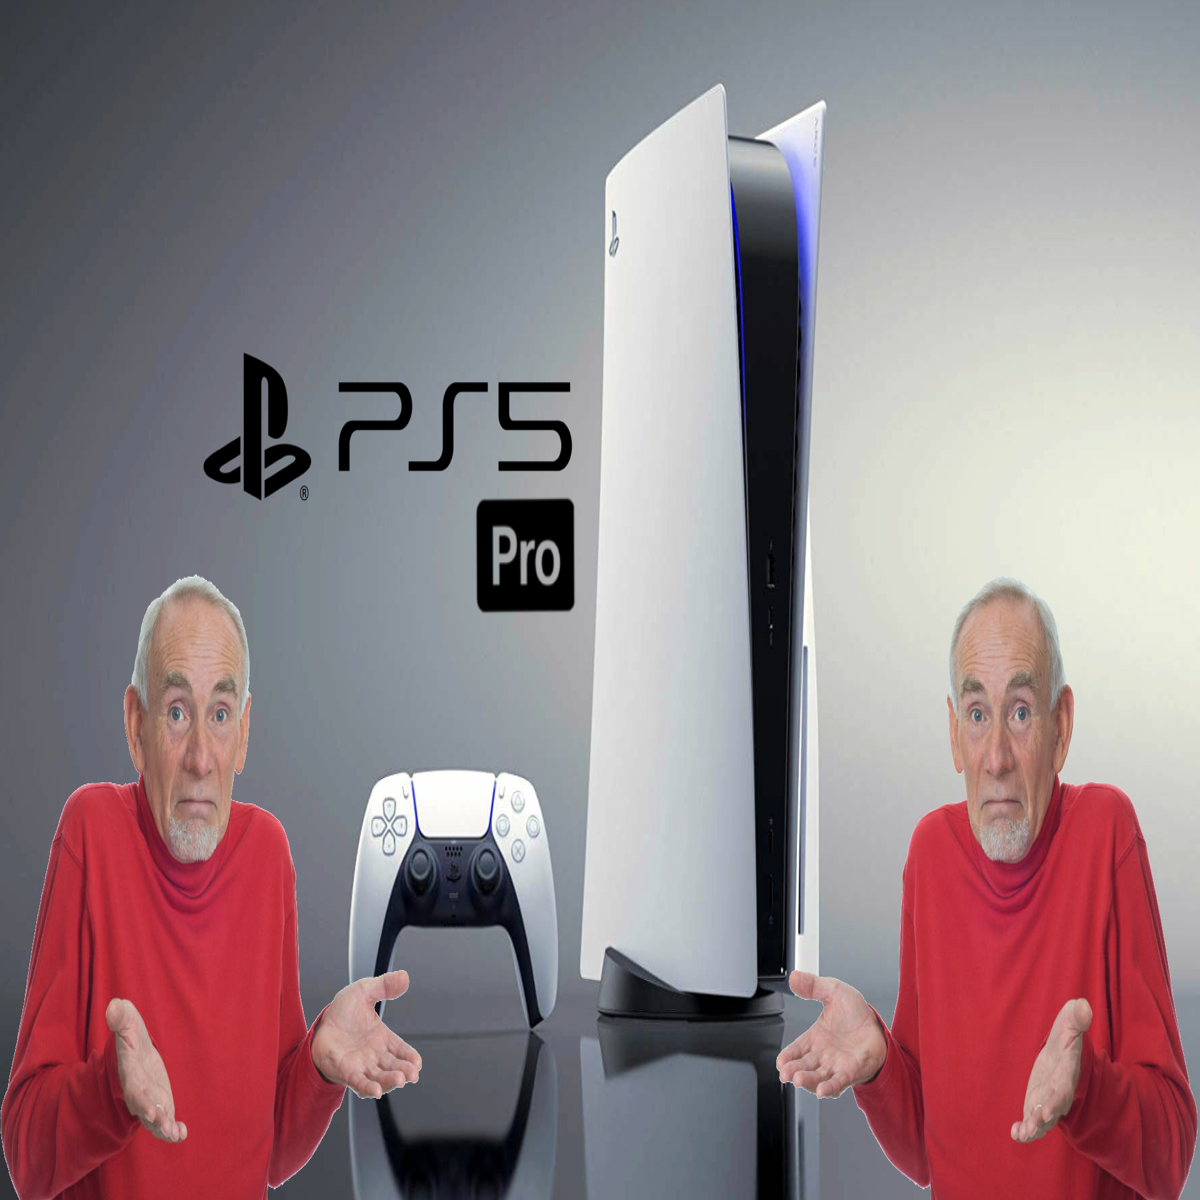 PS5 Pro is the worst idea possible for PlayStation at the moment